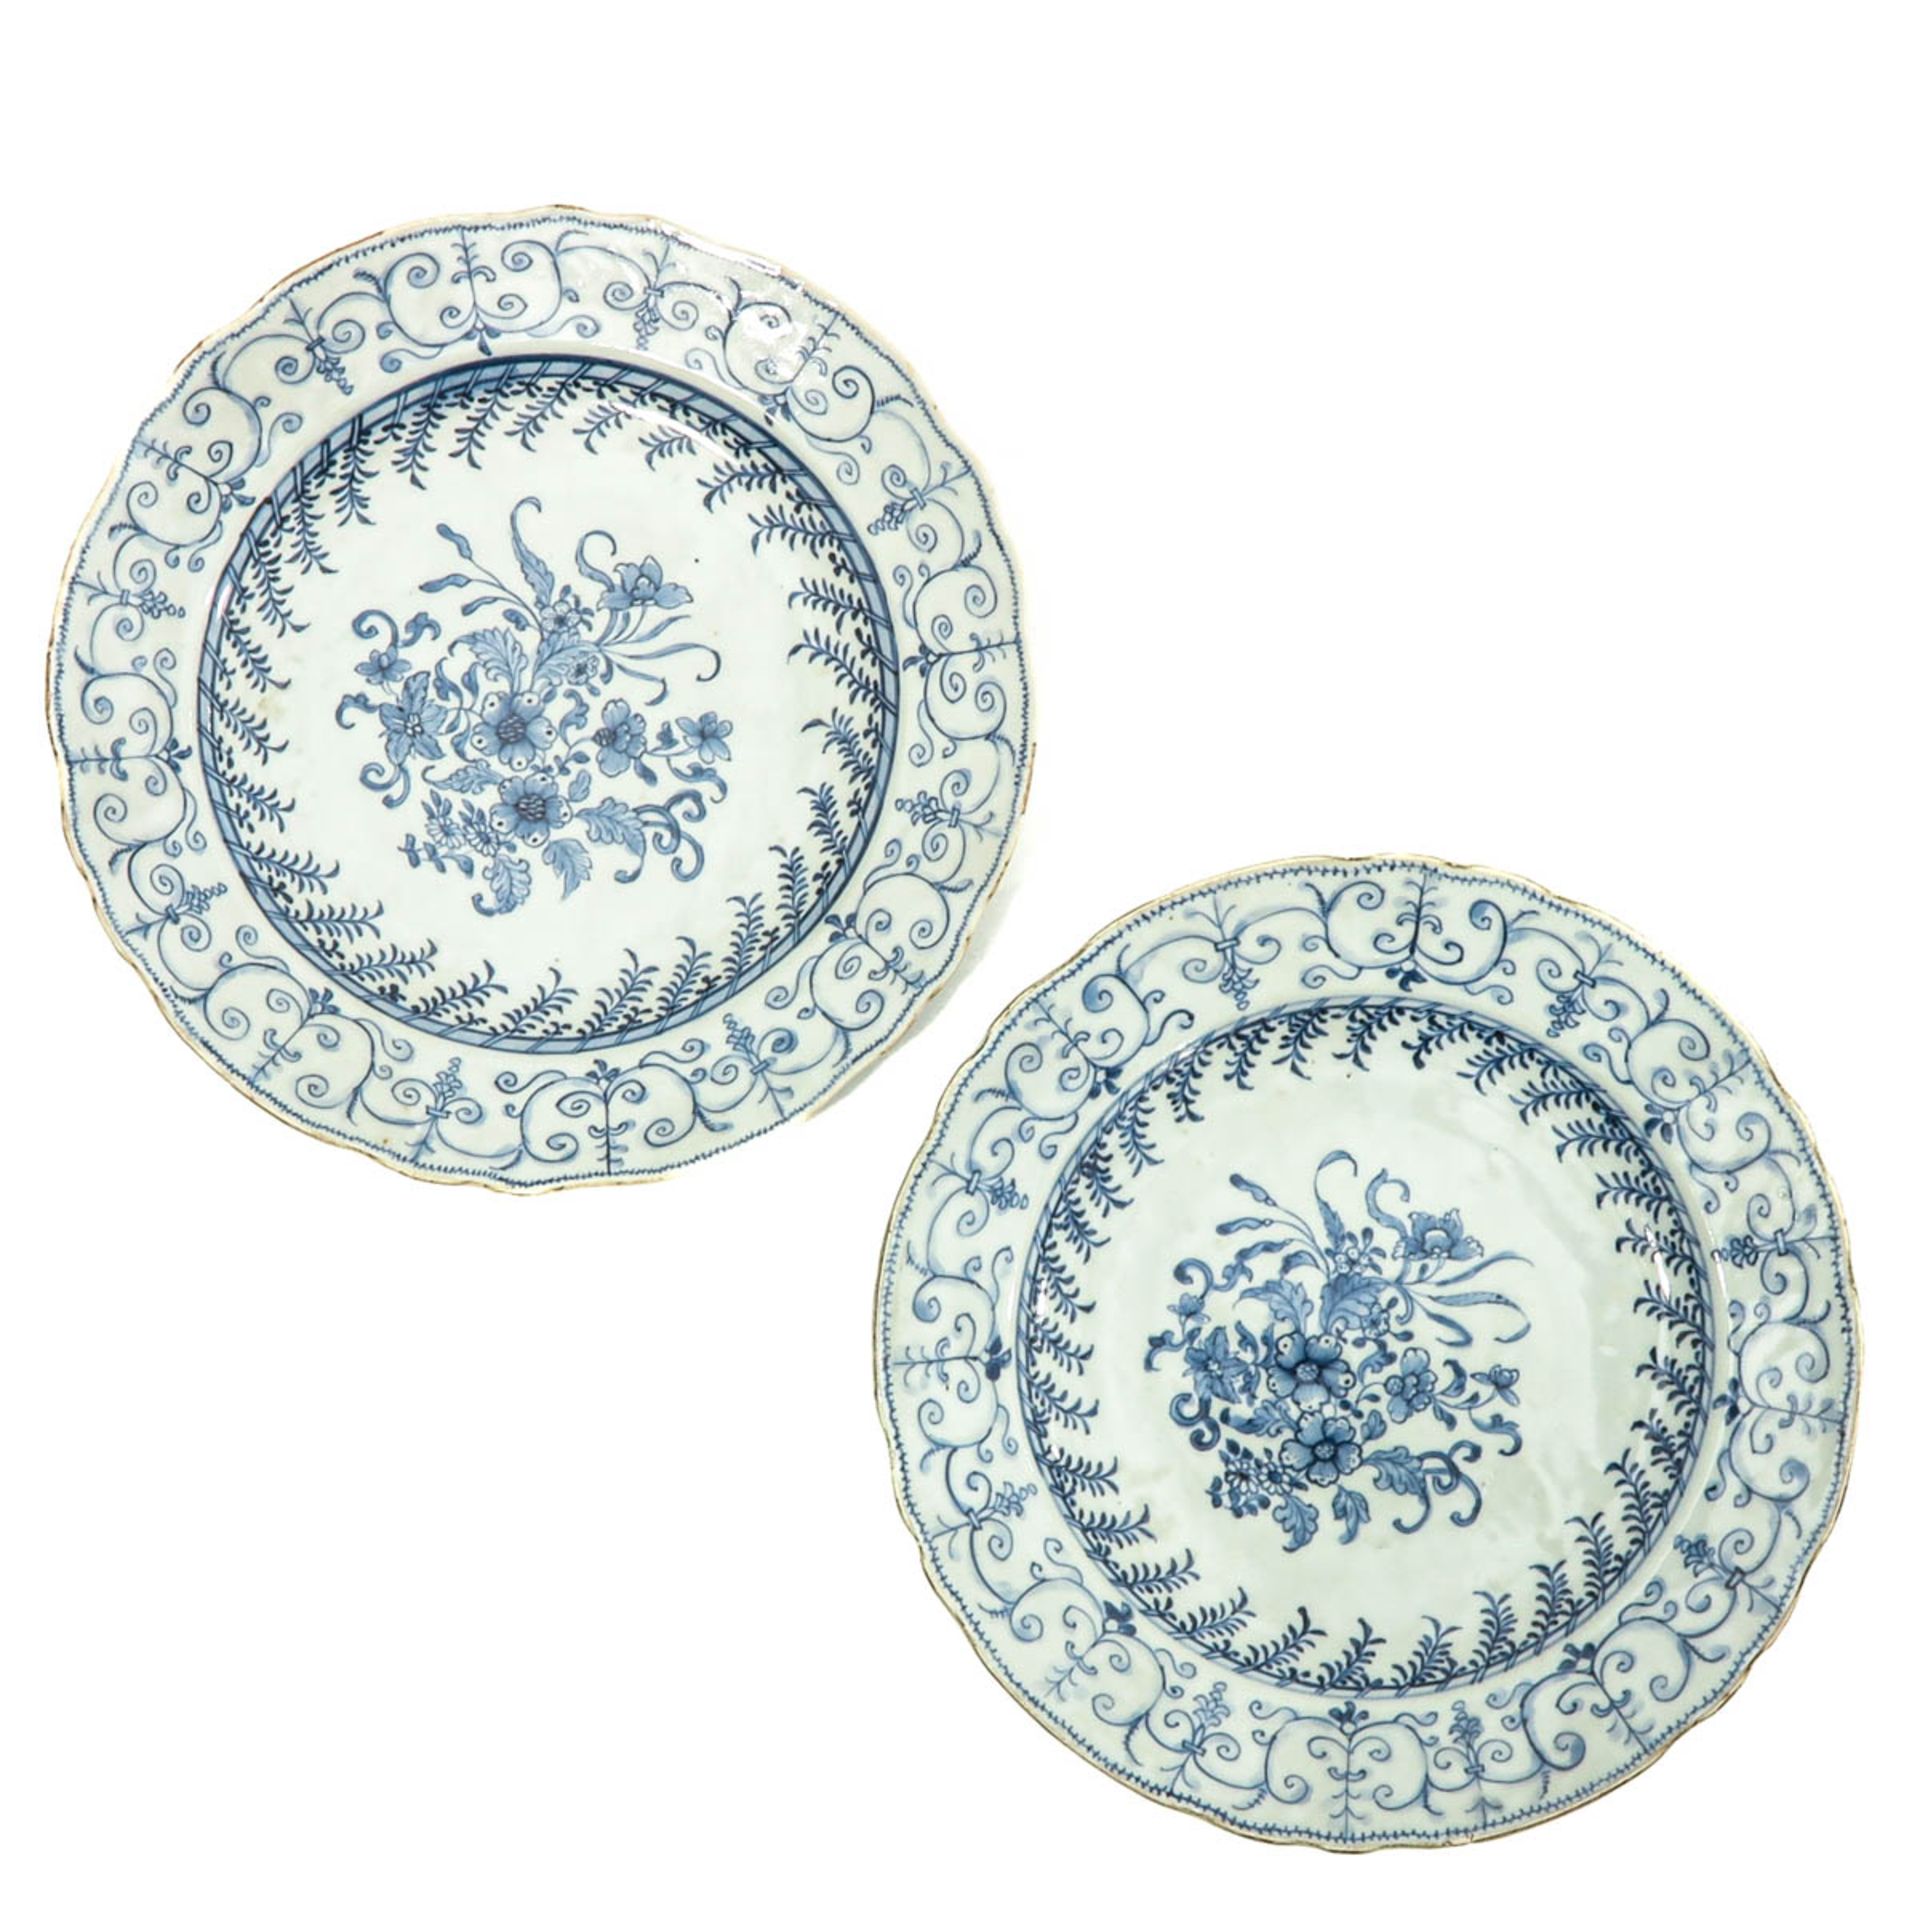 A Series of 5 Blue and White Plates - Bild 3 aus 10